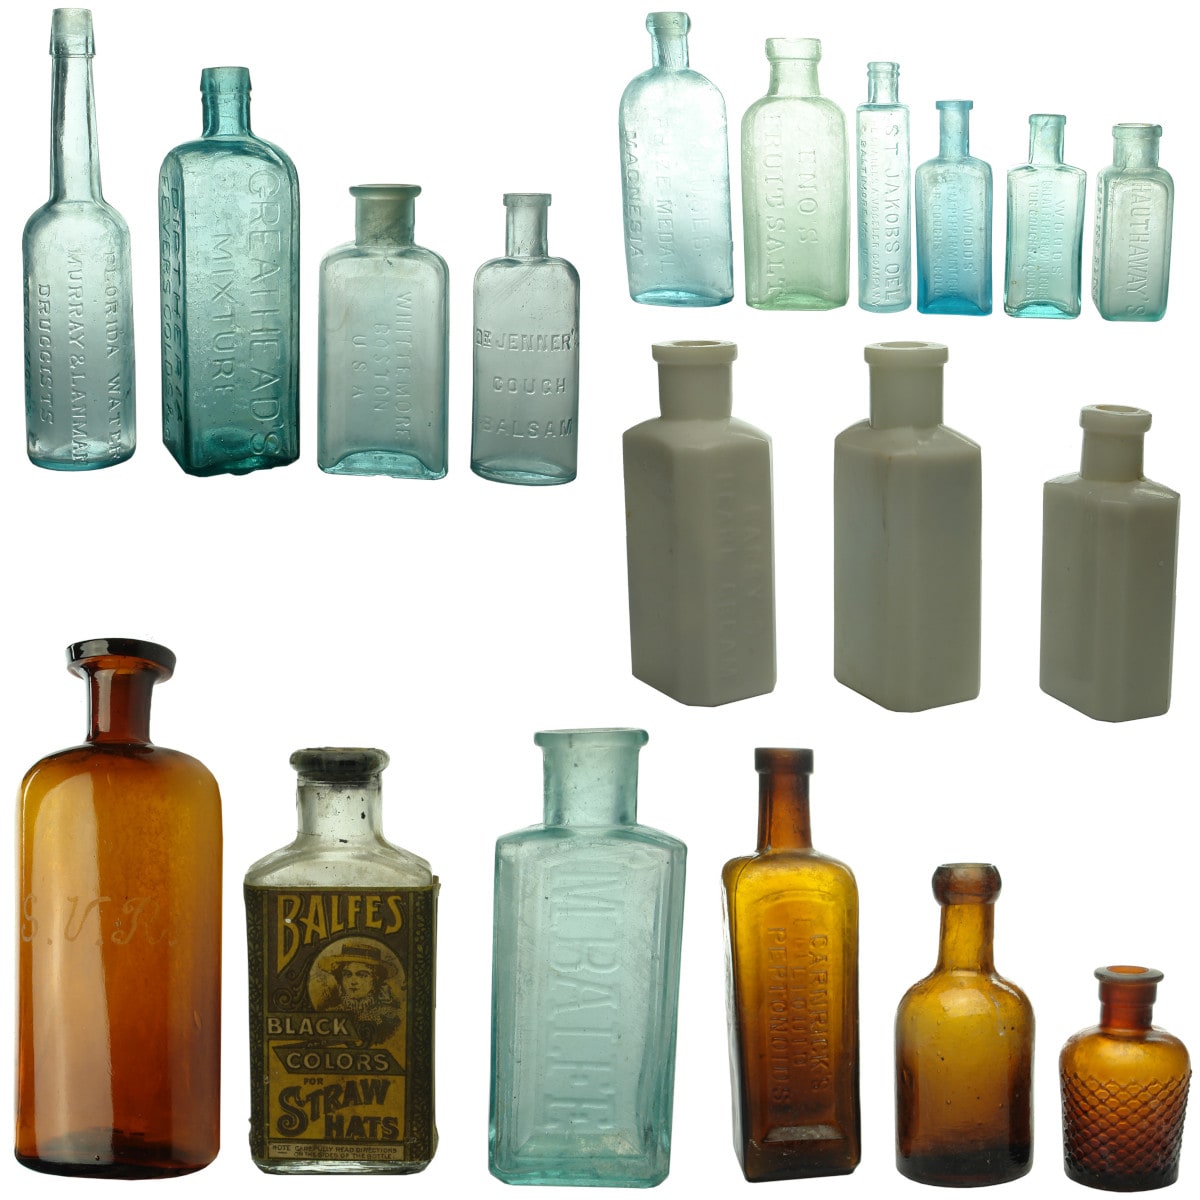 19 Miscellaneous Bottles: Murray & Lanman; Greathead's; Kruse's; Balfe; Carnrick's; Barry's; and more.